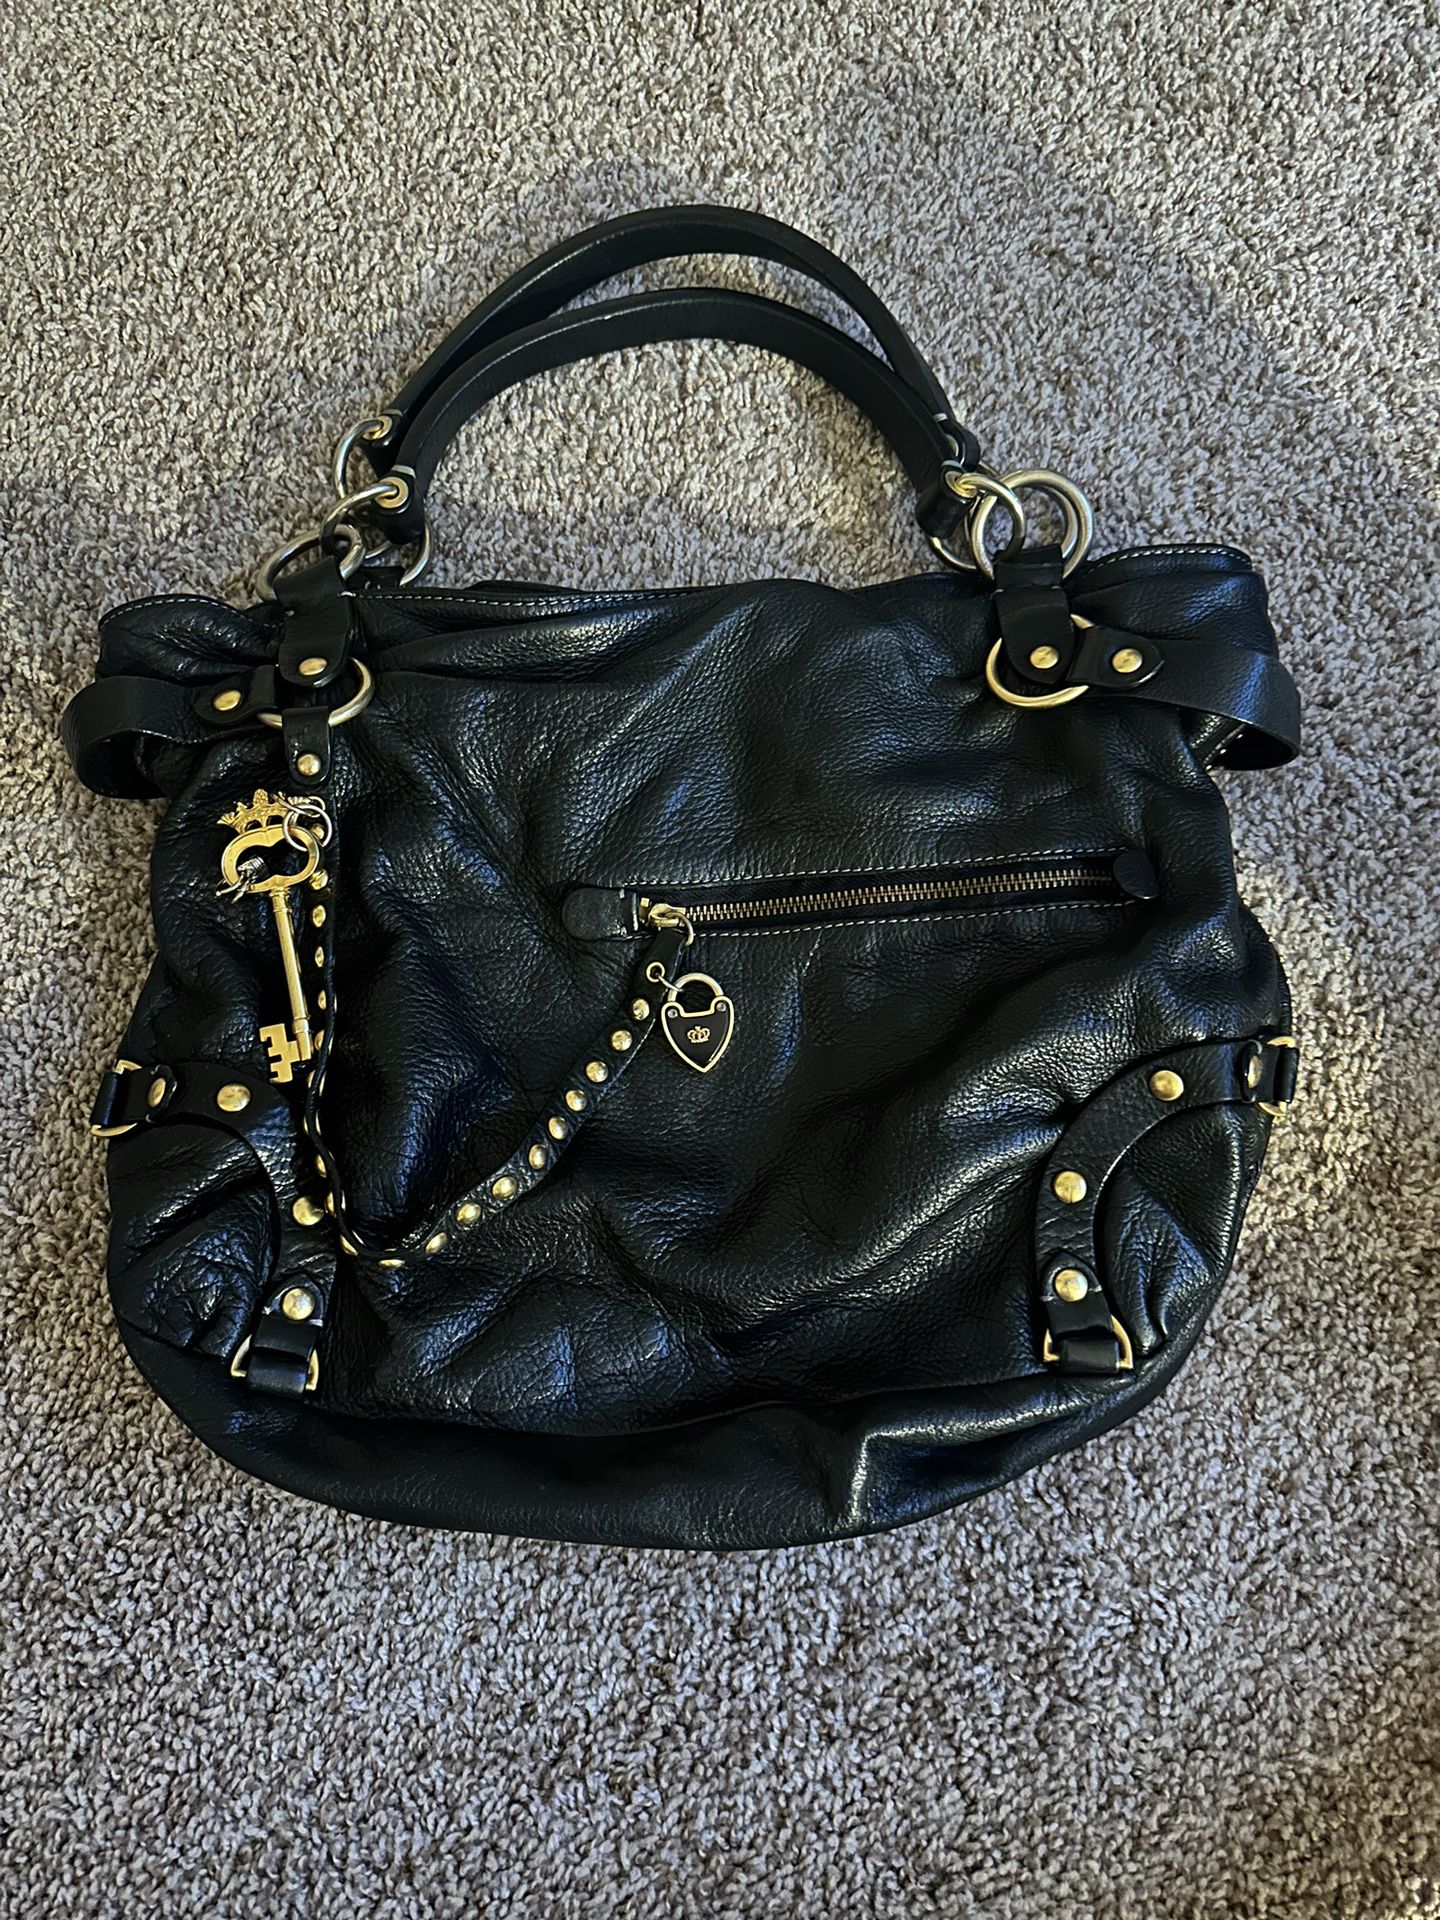 Juicy Couture shopping tote 2005